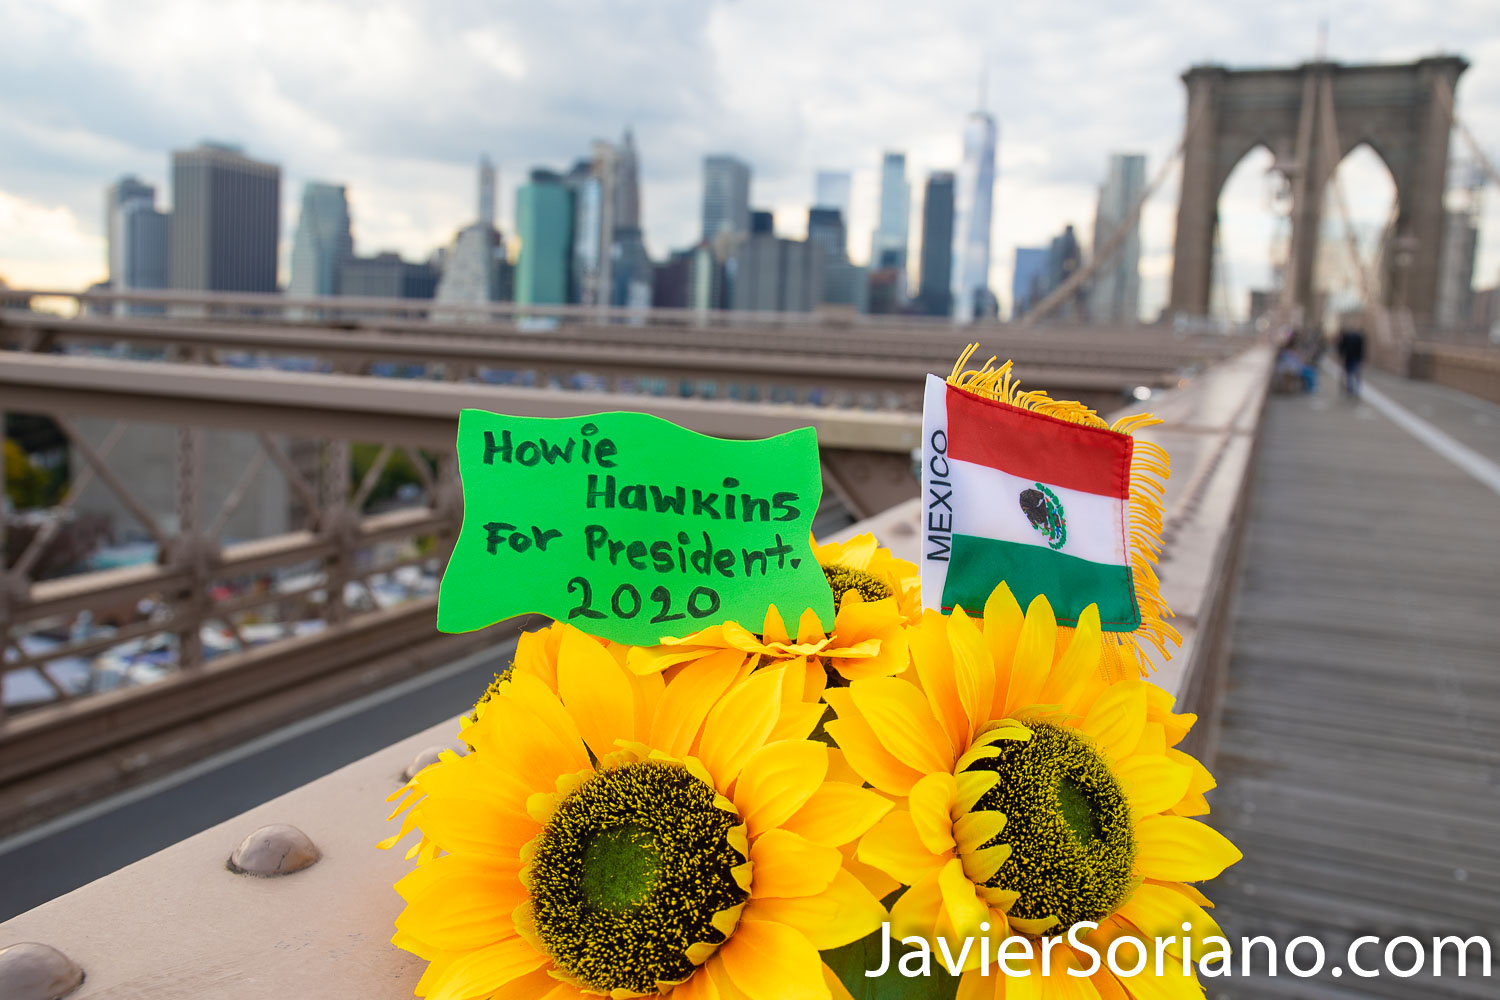 Mexican-Americans support Howie Hawkins for president 2020. HowieHawkins.us I took this photo on the Brooklyn Bridge in New York City. Photo by Javier Soriano/www.JavierSoriano.com